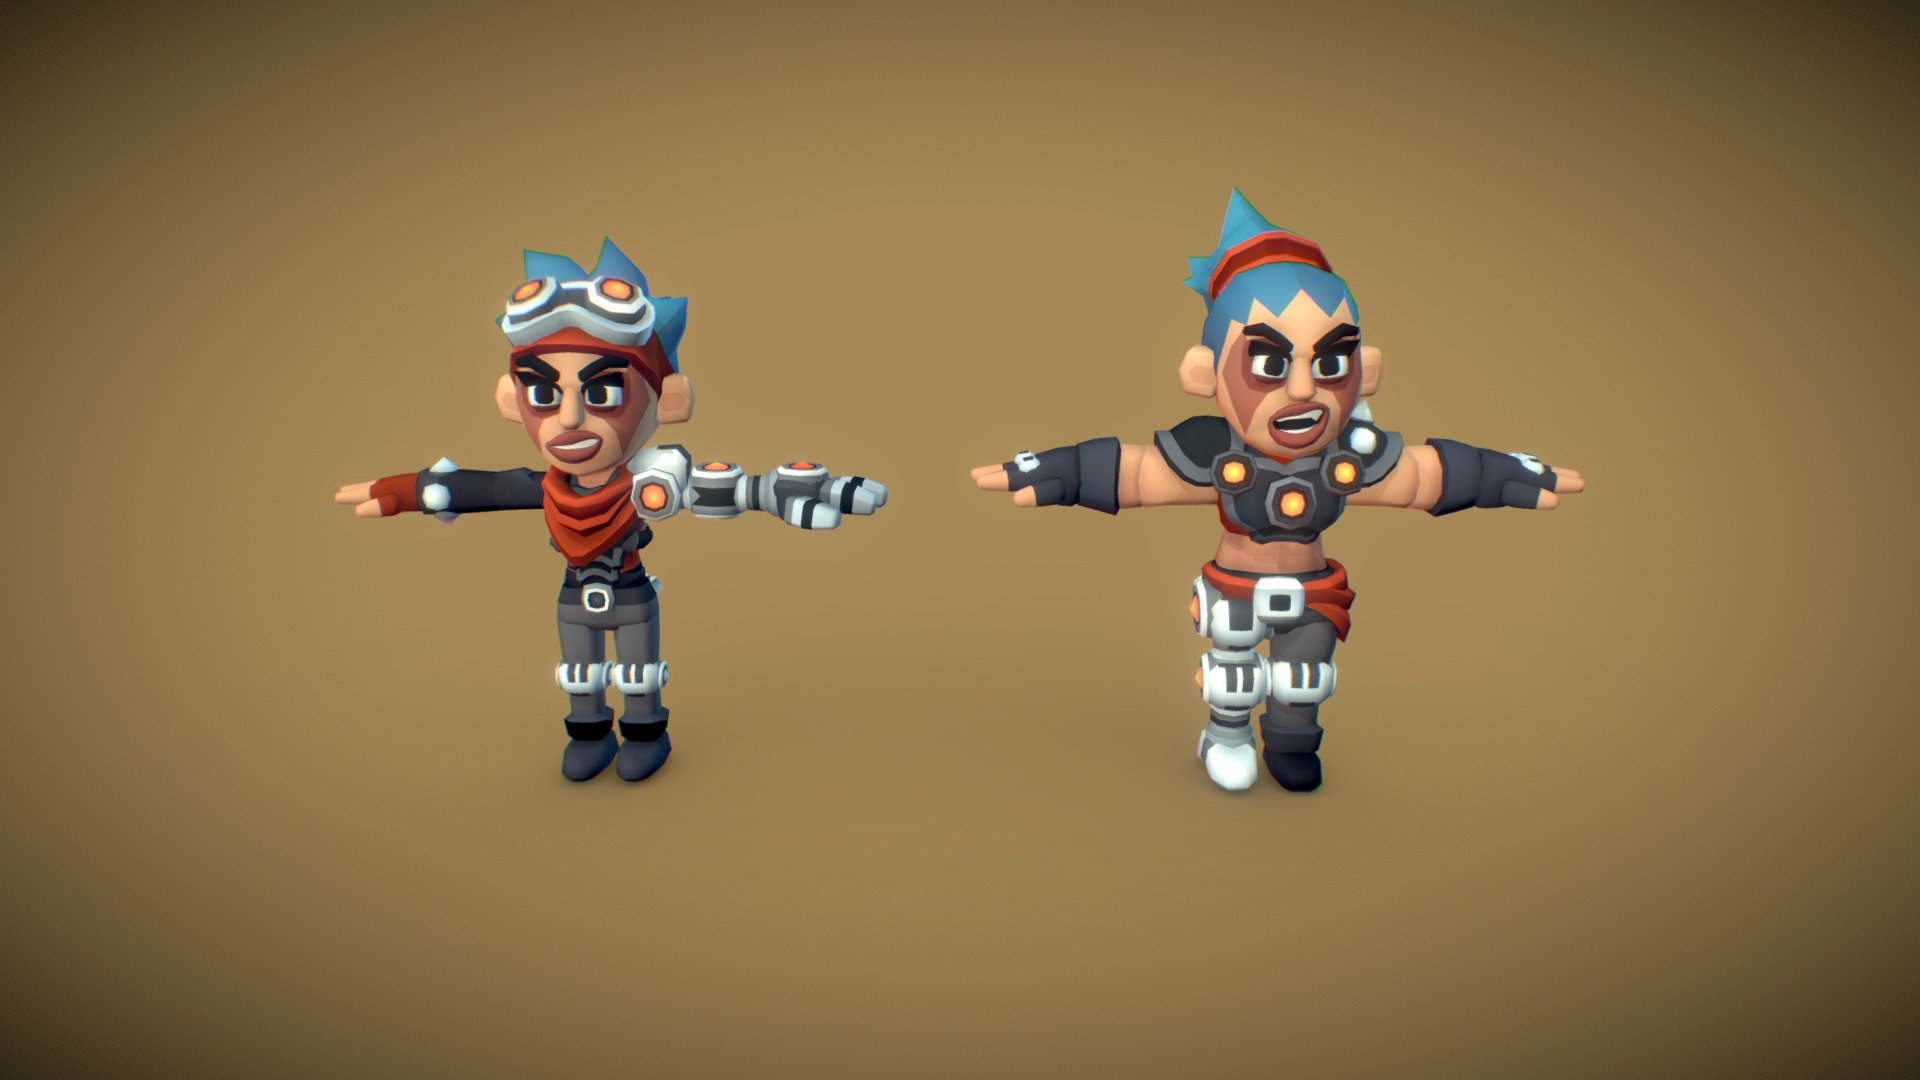 Preview scene for the wicket sisters for the Tombstar game 3d model